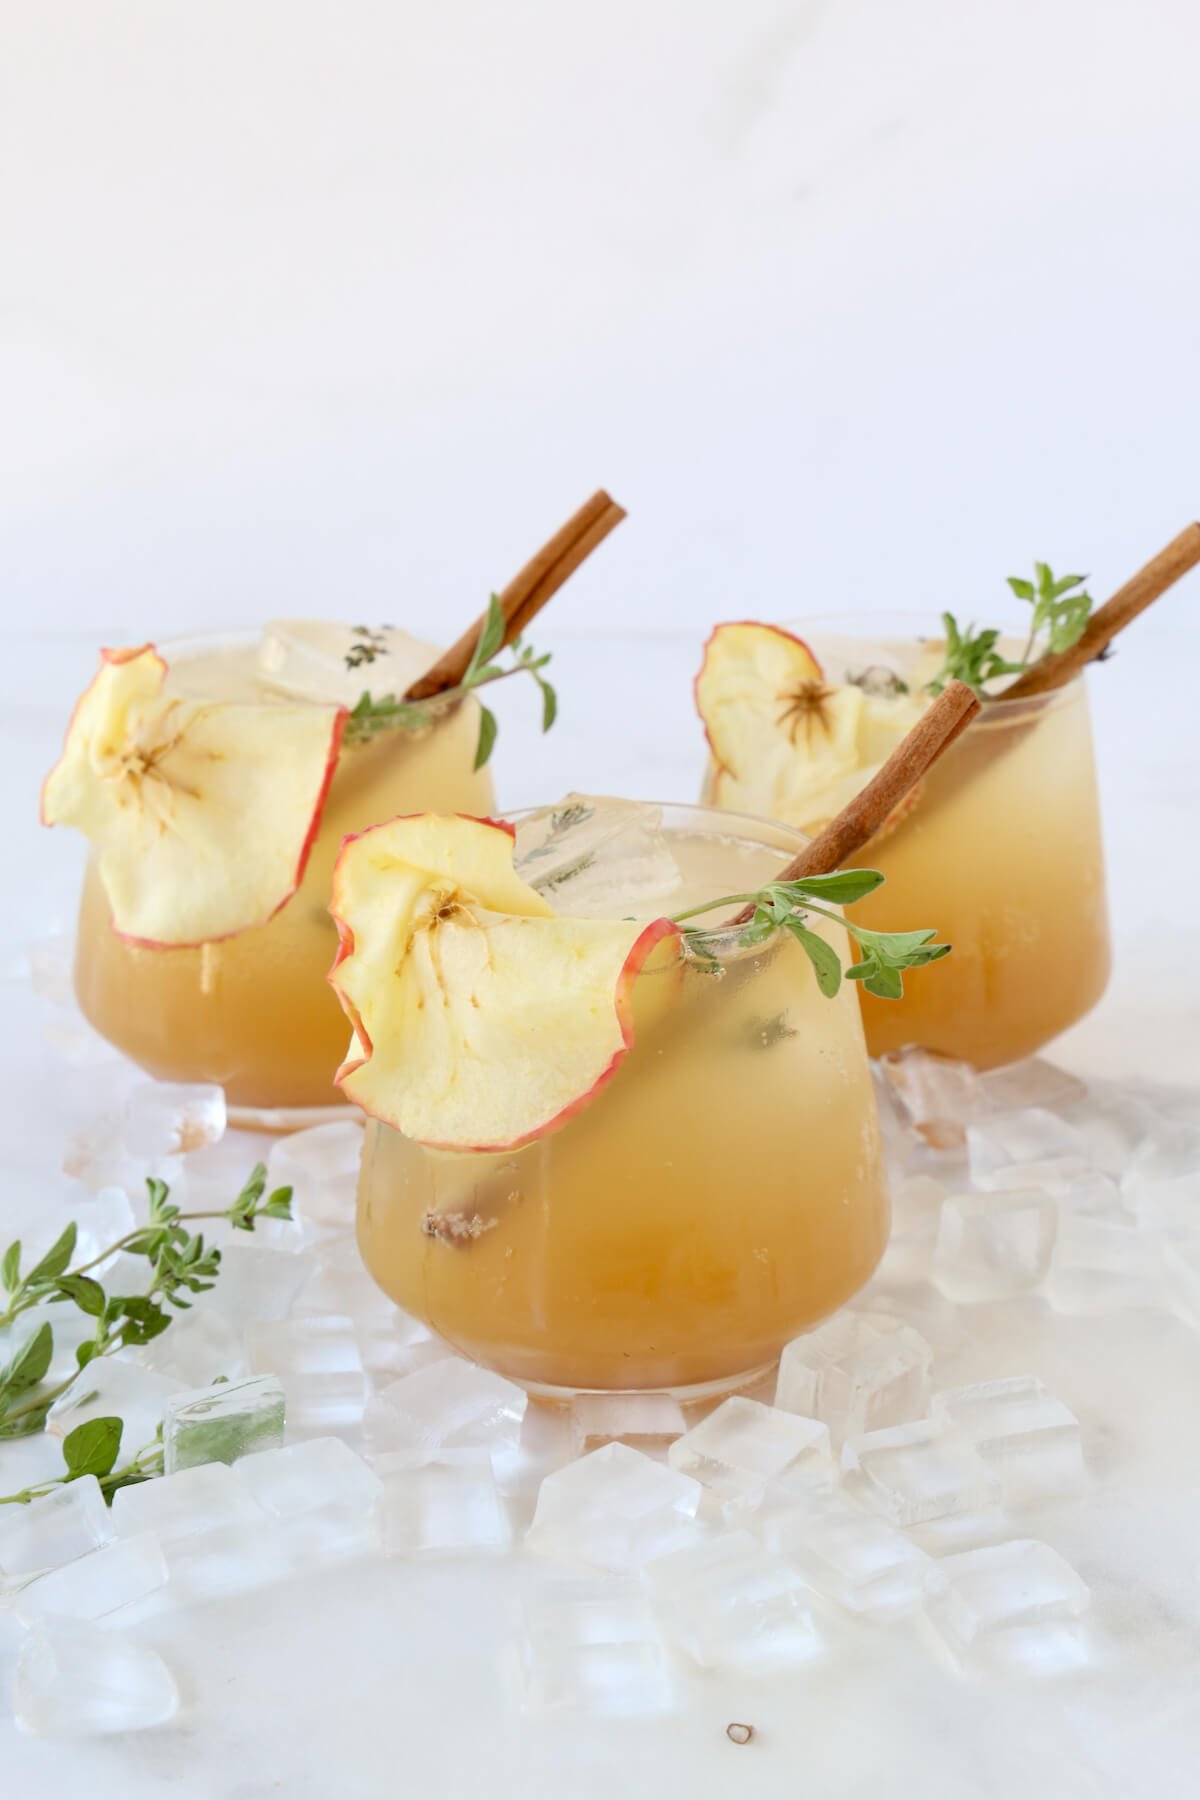 Three glasses filled with bourbon, apple cider, simple syrup and sparkling water and garnished with a cinnamon stick and apples slice.